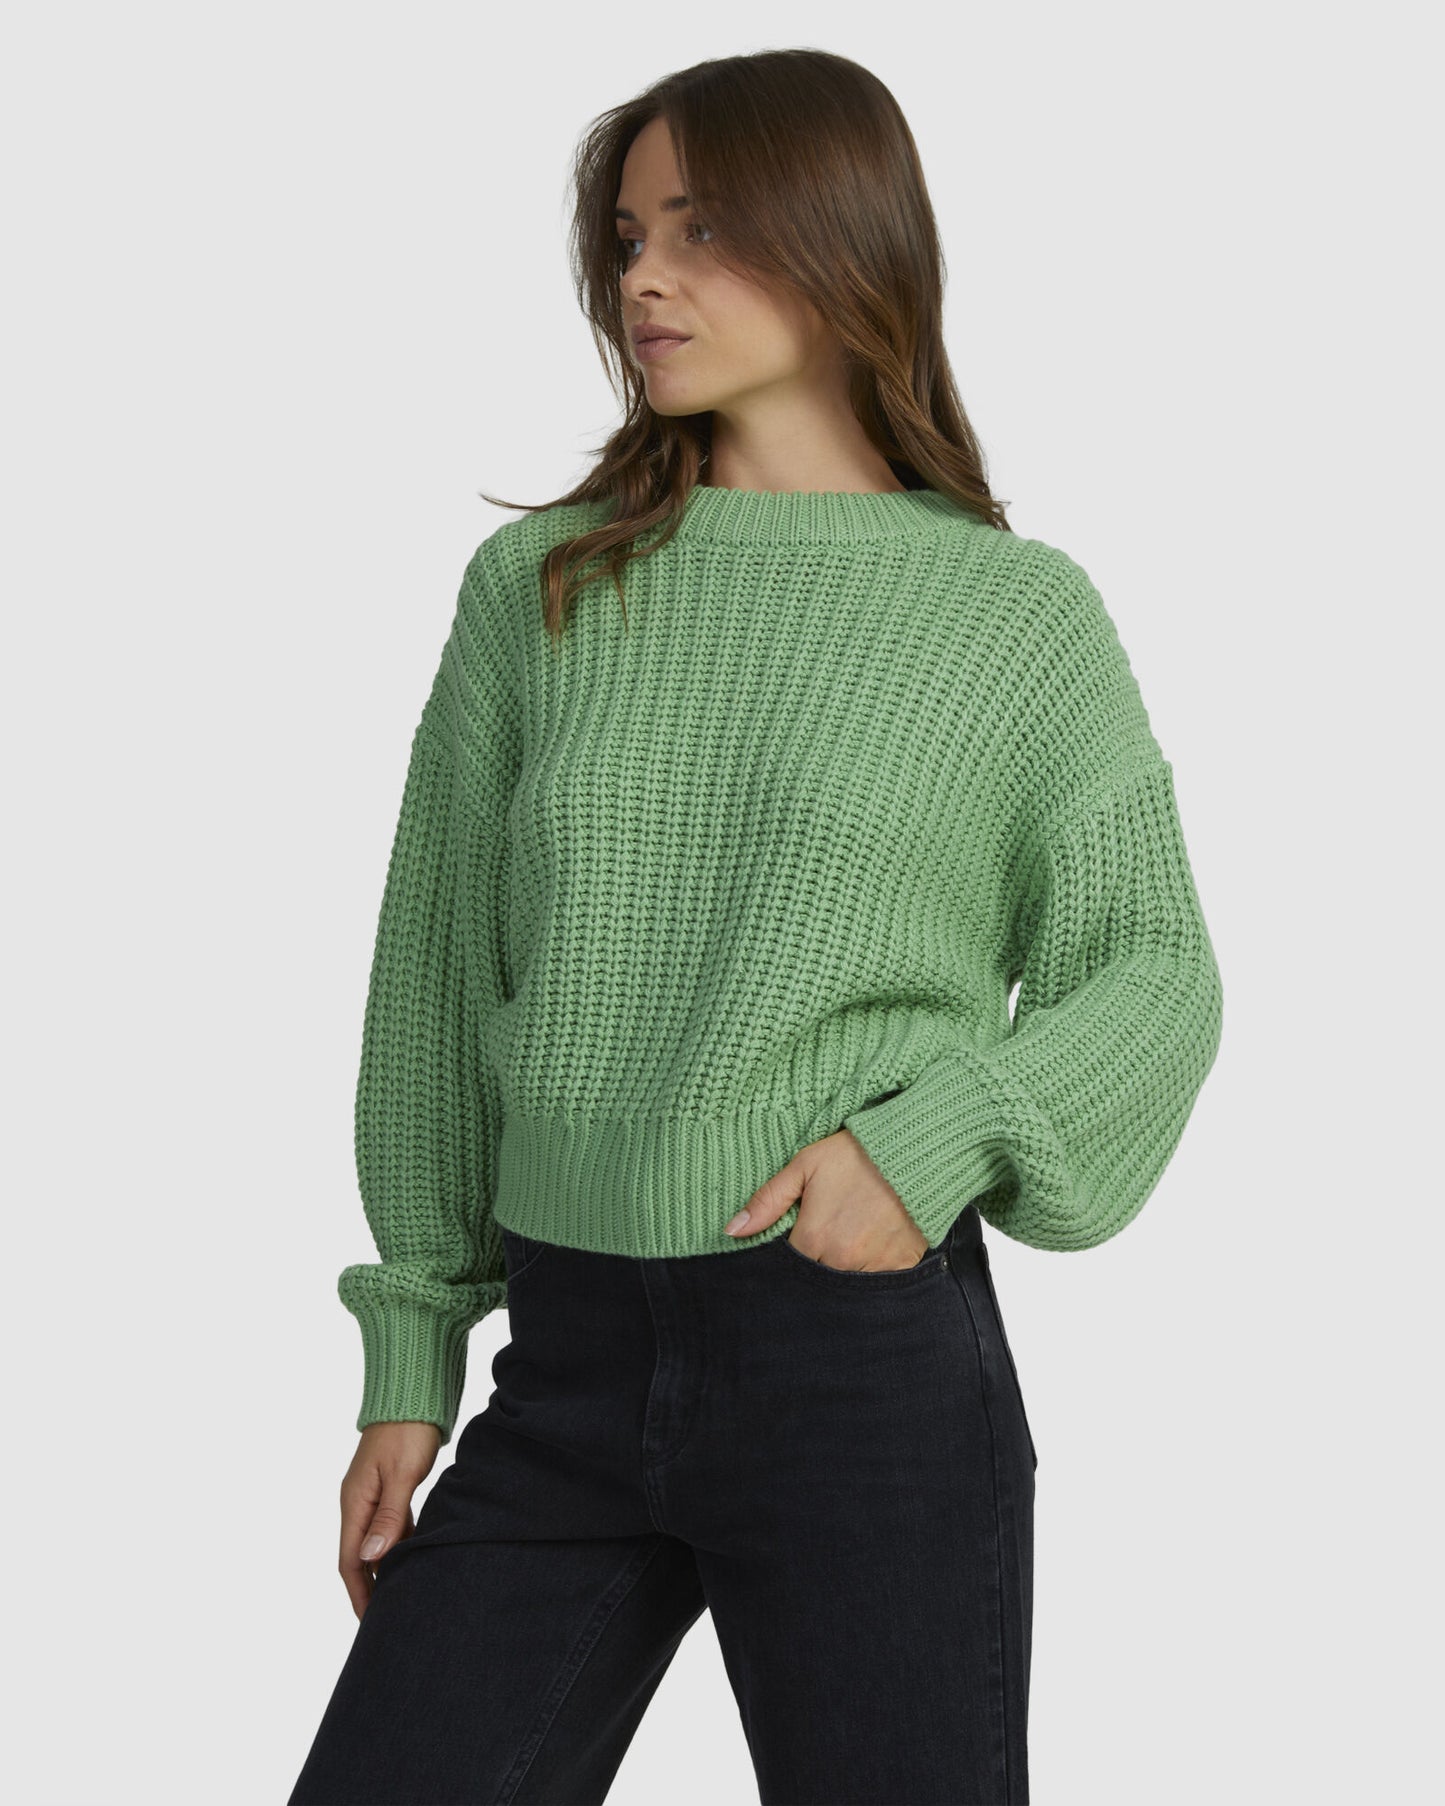 ROXY COMING HOME SWEATER